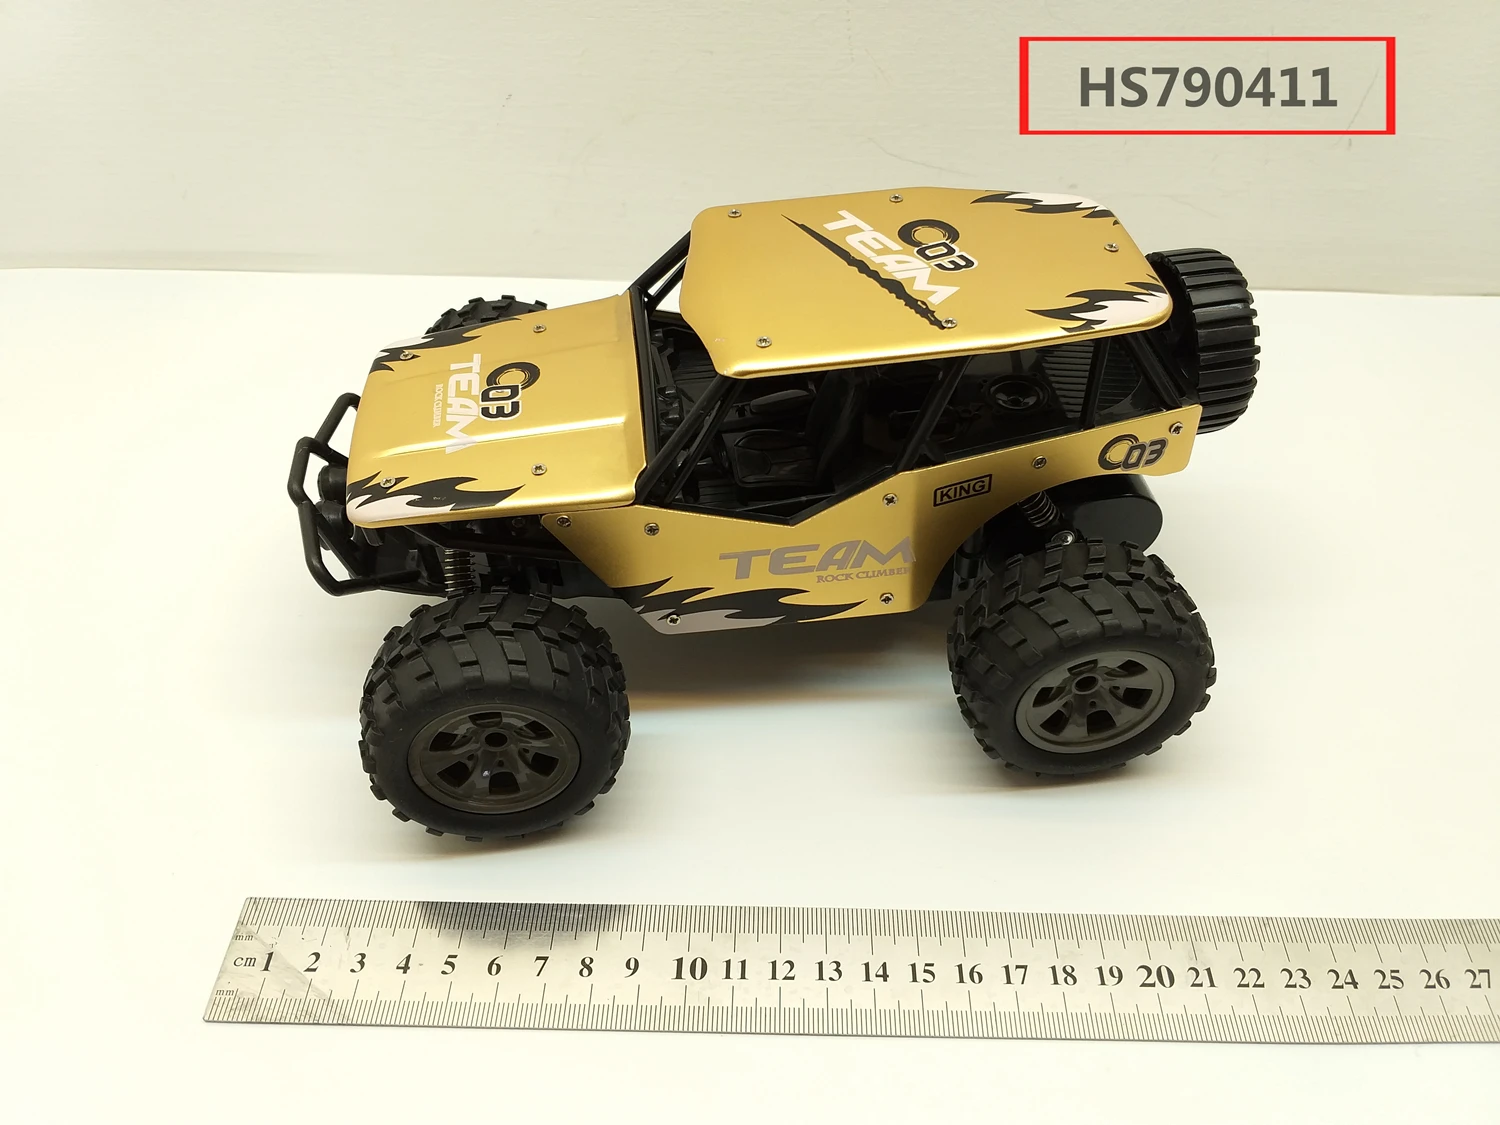 HS790411, Huwsin Toys, 118 2.4G Alloy rc car,red/blue/gold 3color mixed, Remote Control High Speed Vehicle RC Toys